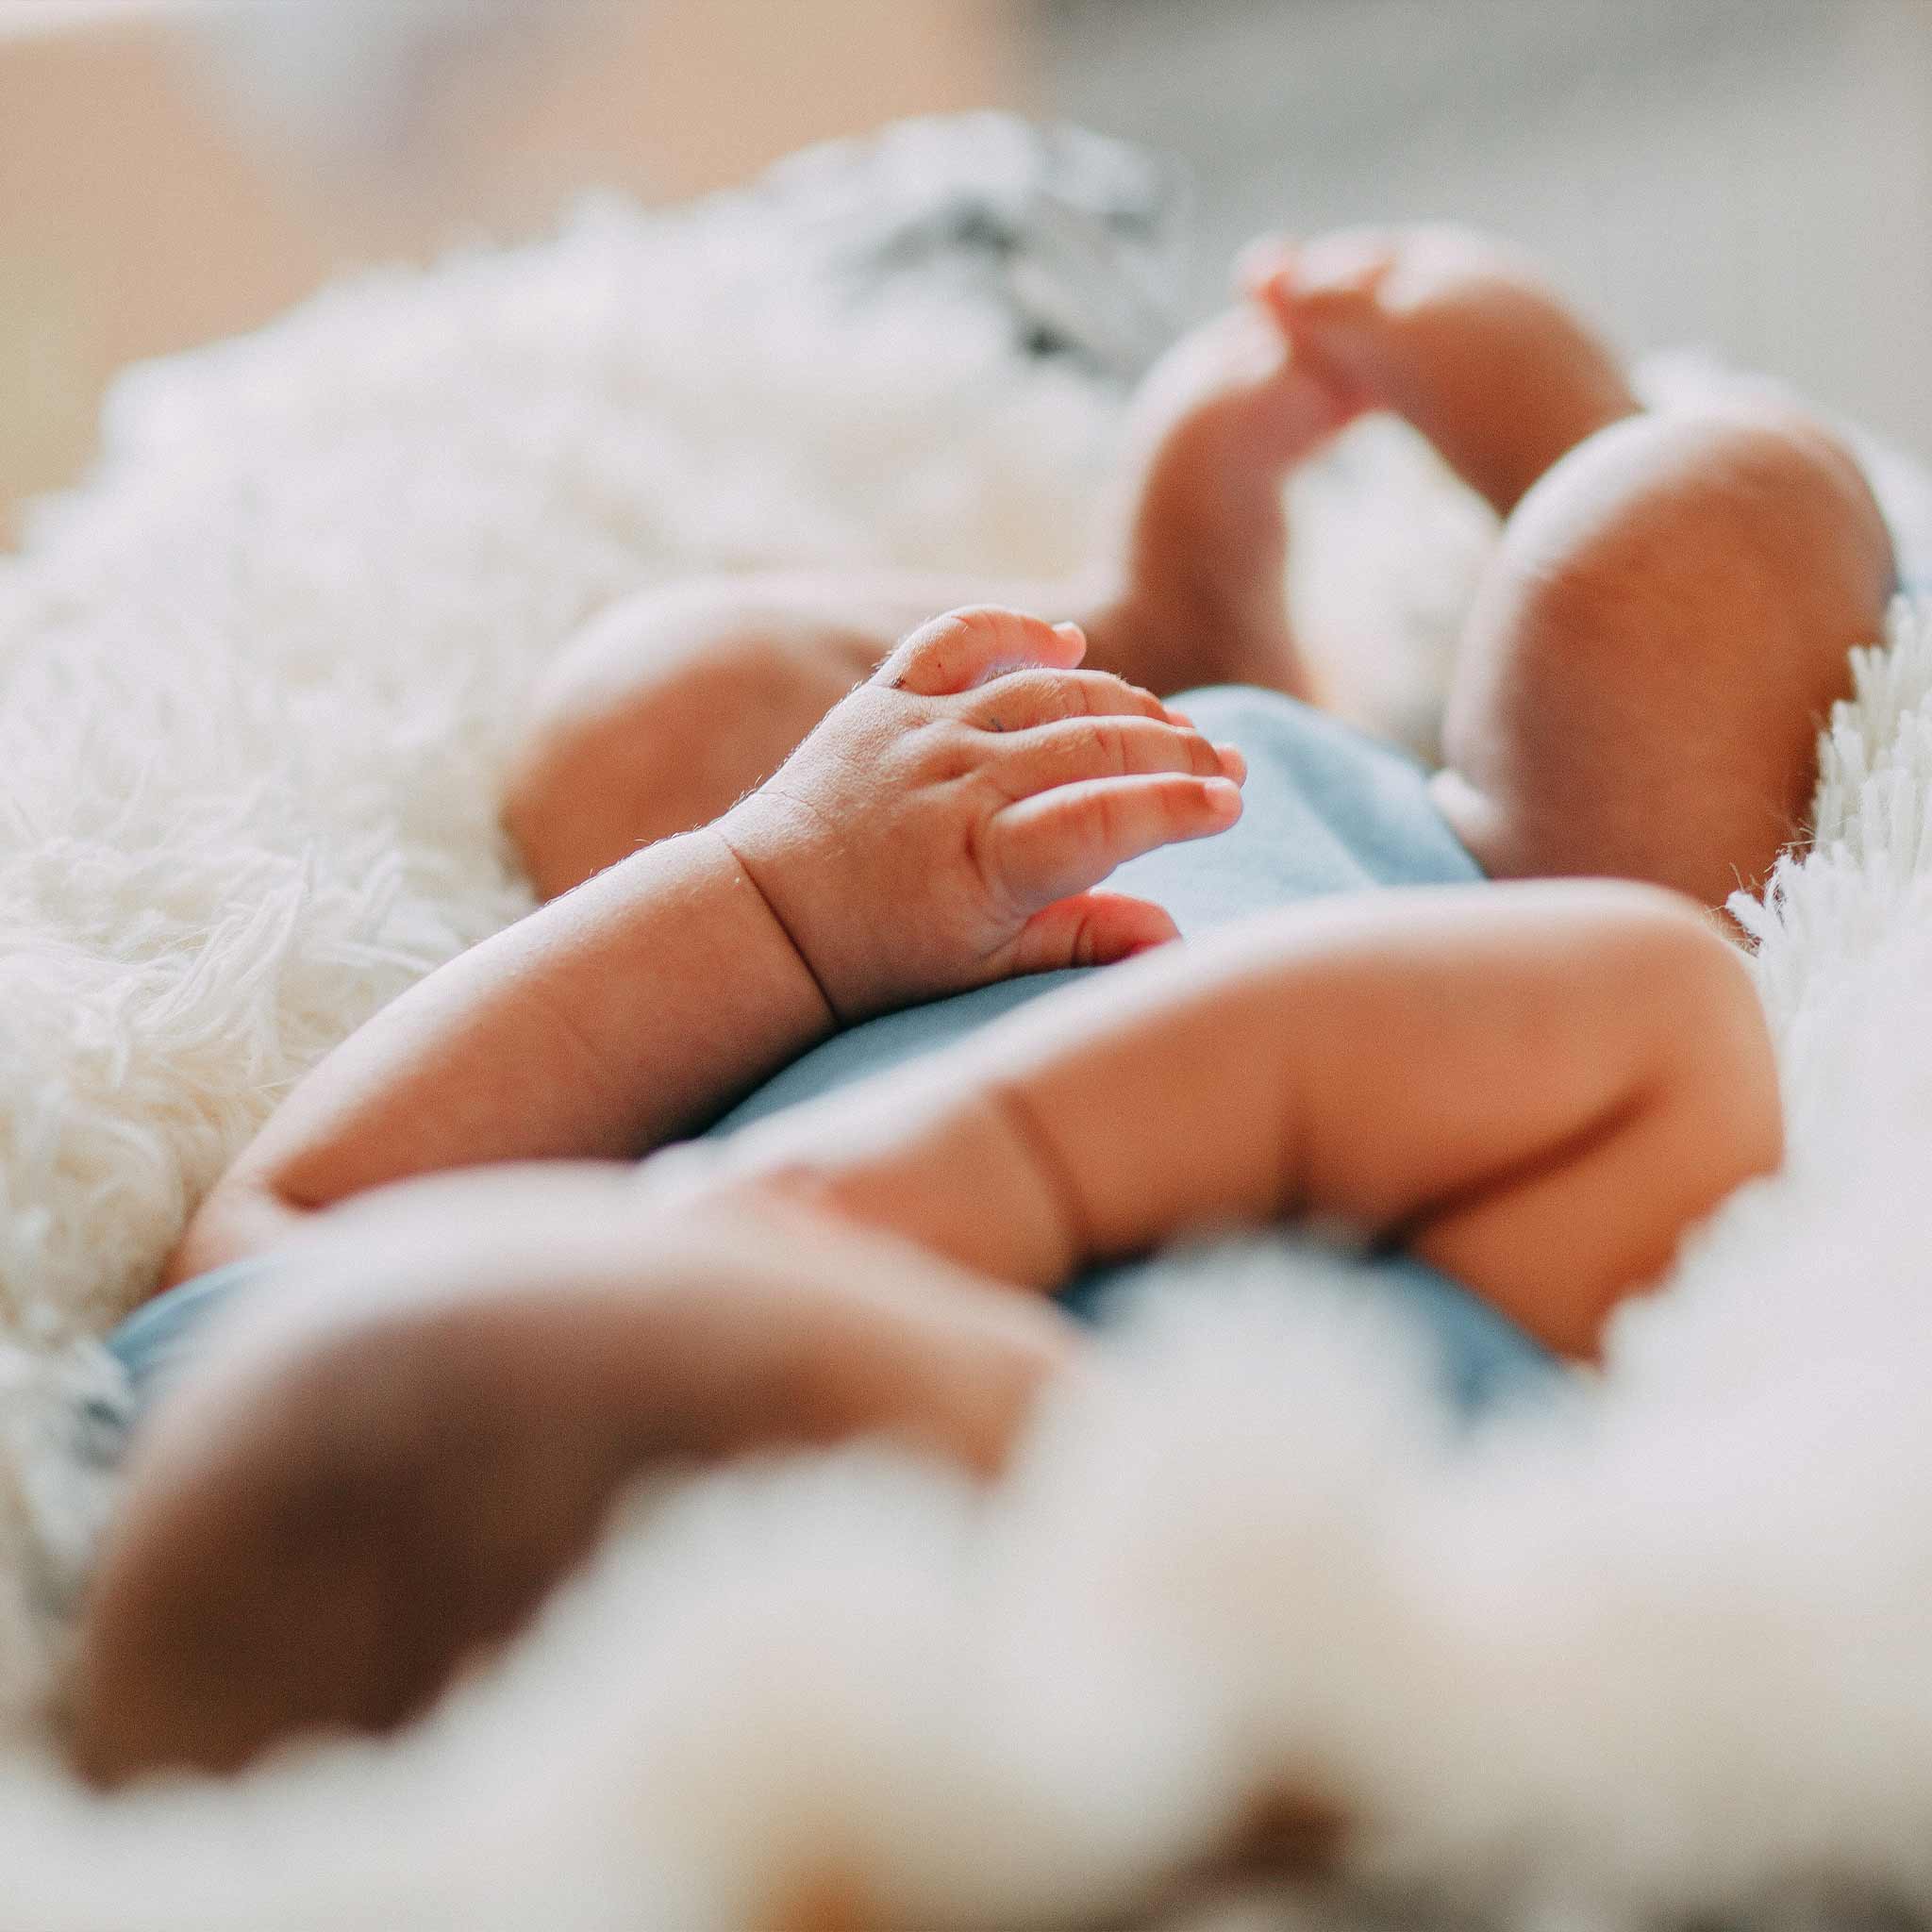 Things we wished we would have done during the newborn stage